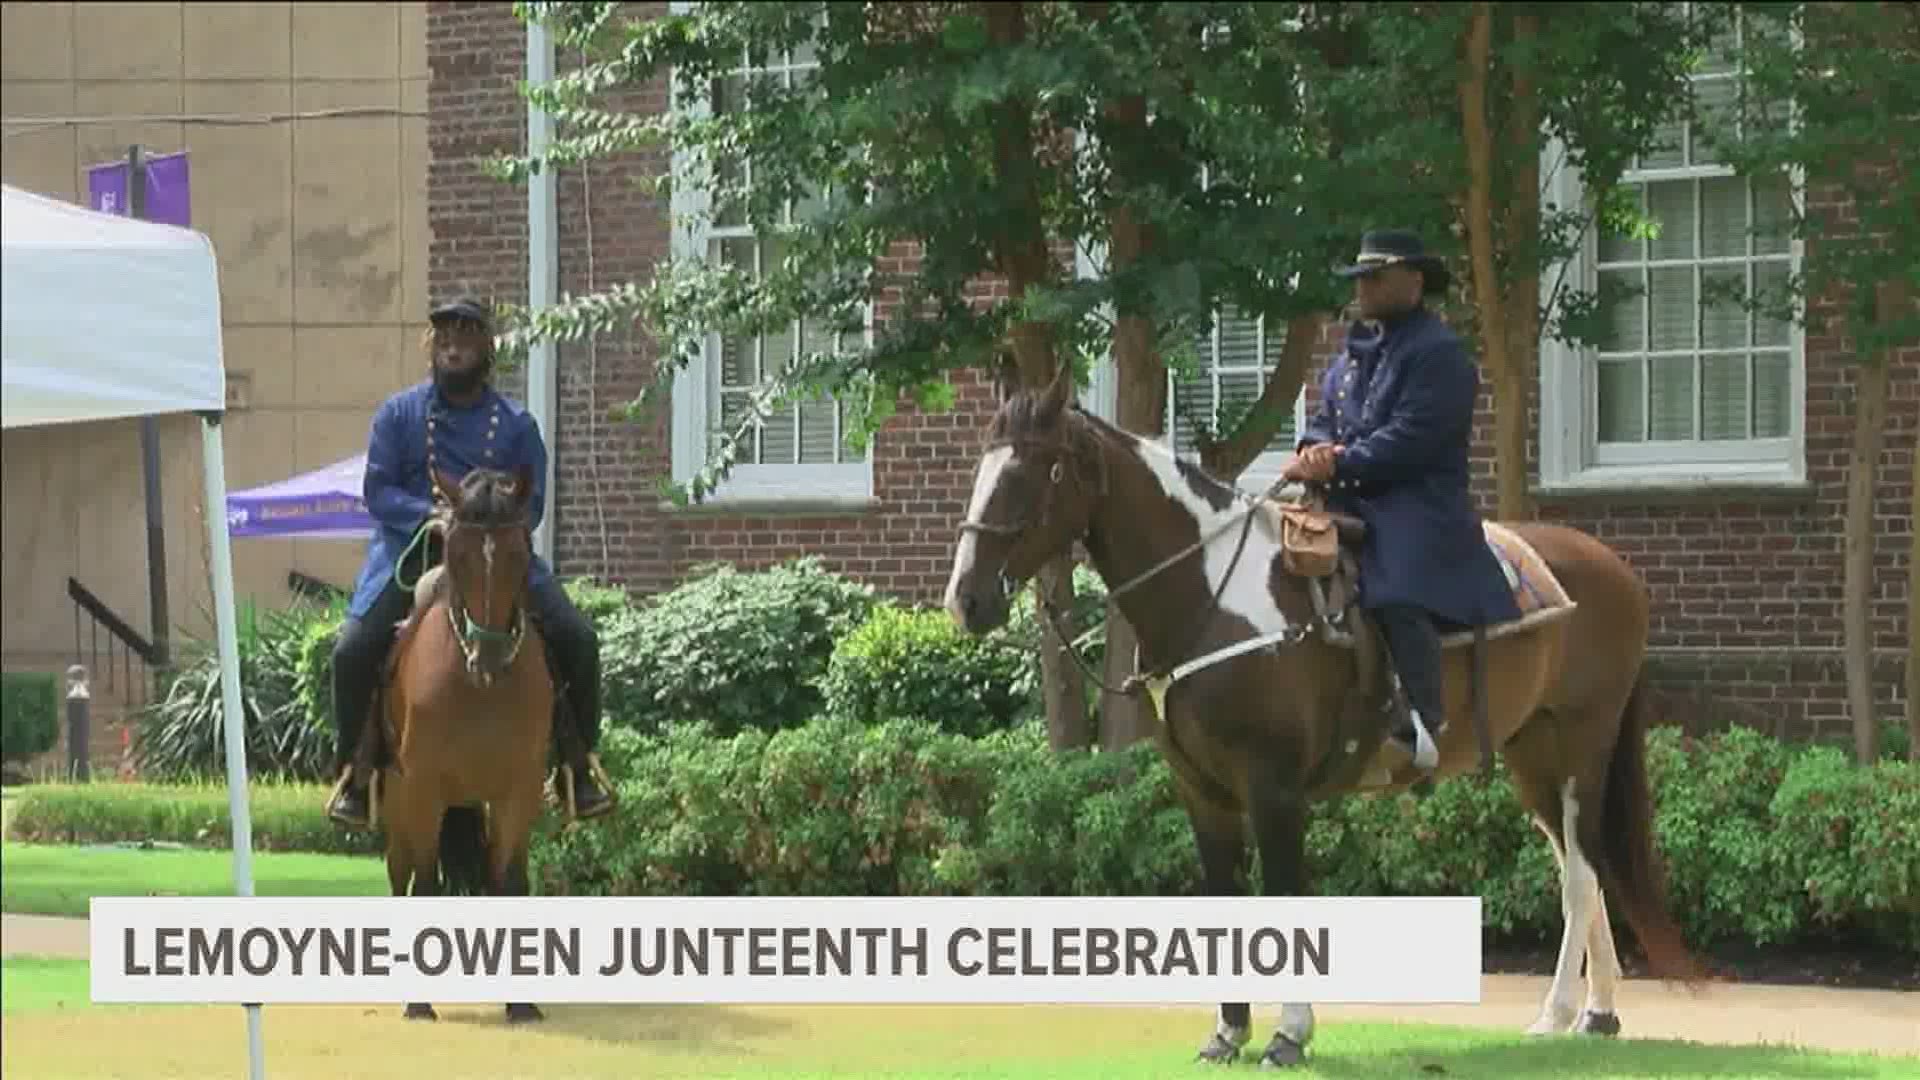 There was a re-enactment & bike ride at LeMoyne-Owen College, special demonstrations at Slave Haven Underground Railroad Museum, & a 1st ever event in Orange Mound.